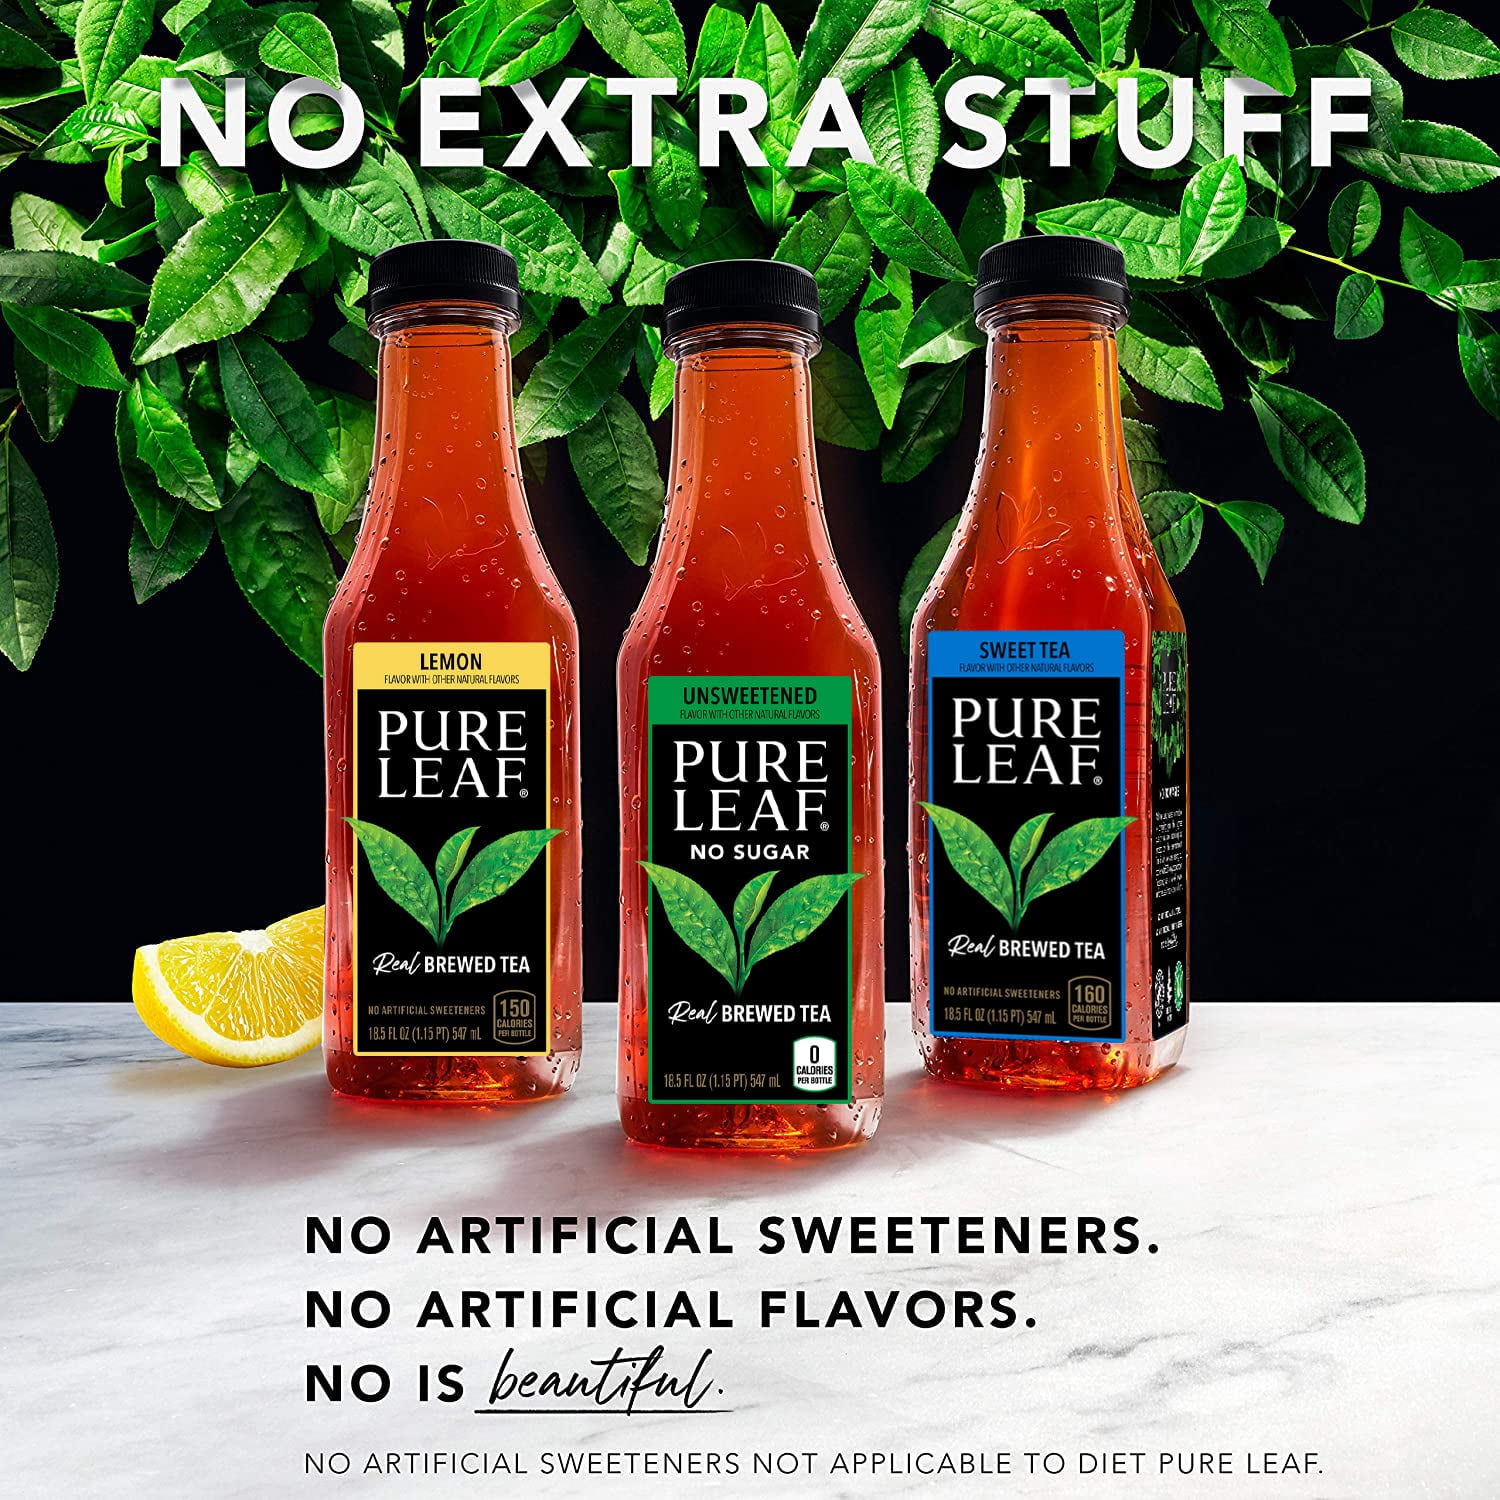 Pure Leaf Is Dropping A Limited Edition Iced Tea In Honor Of A New